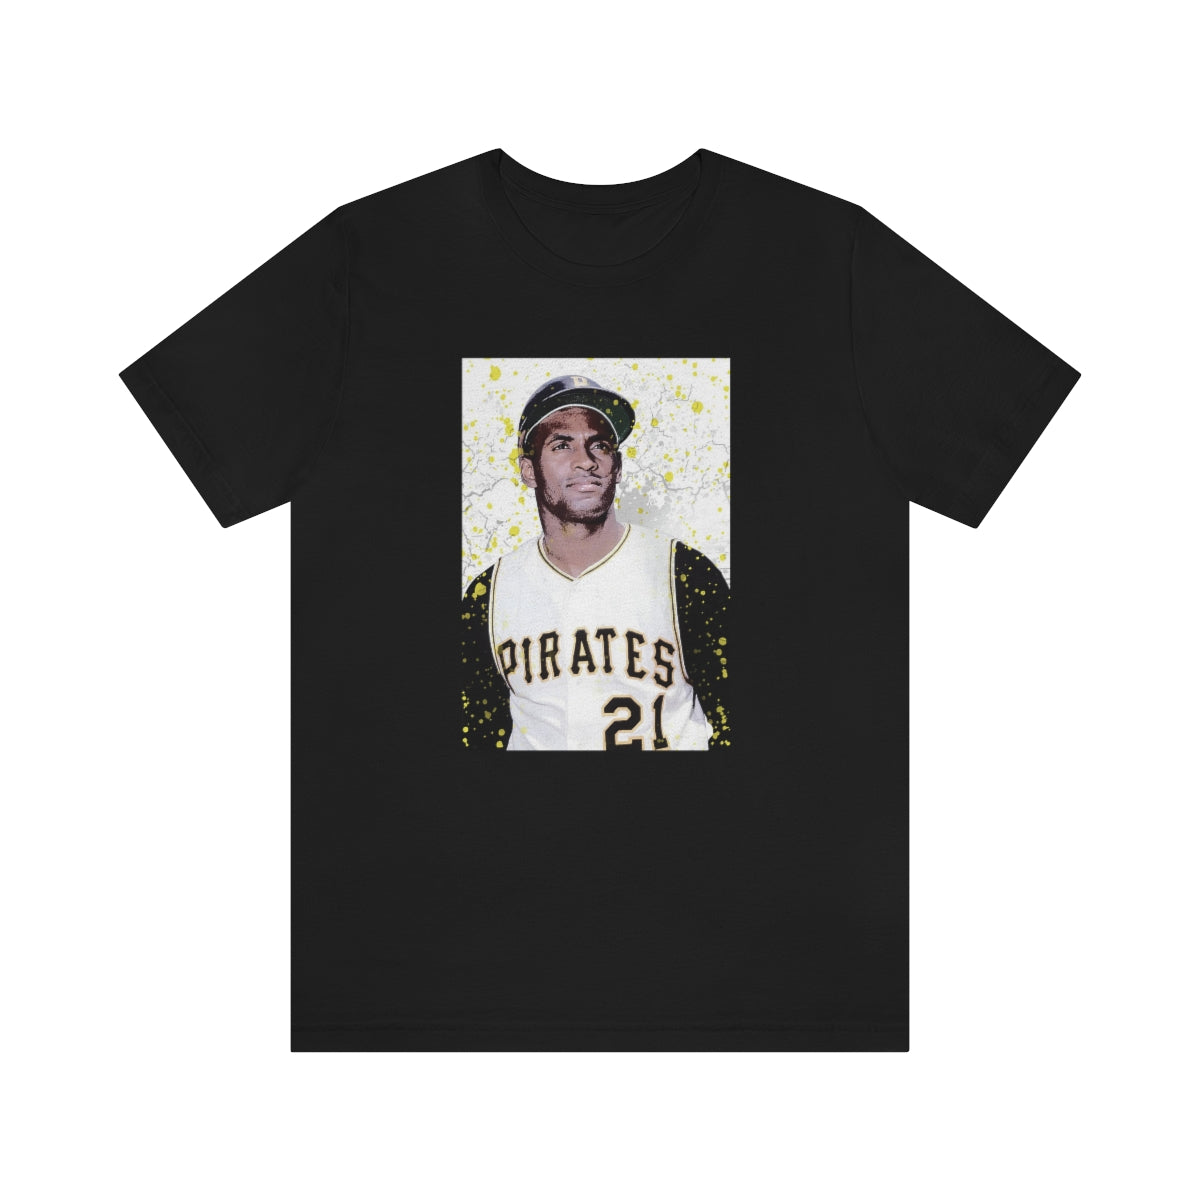 ROBERTO CLEMENTE PIRATES JERSEY SIZE 48 for Sale in